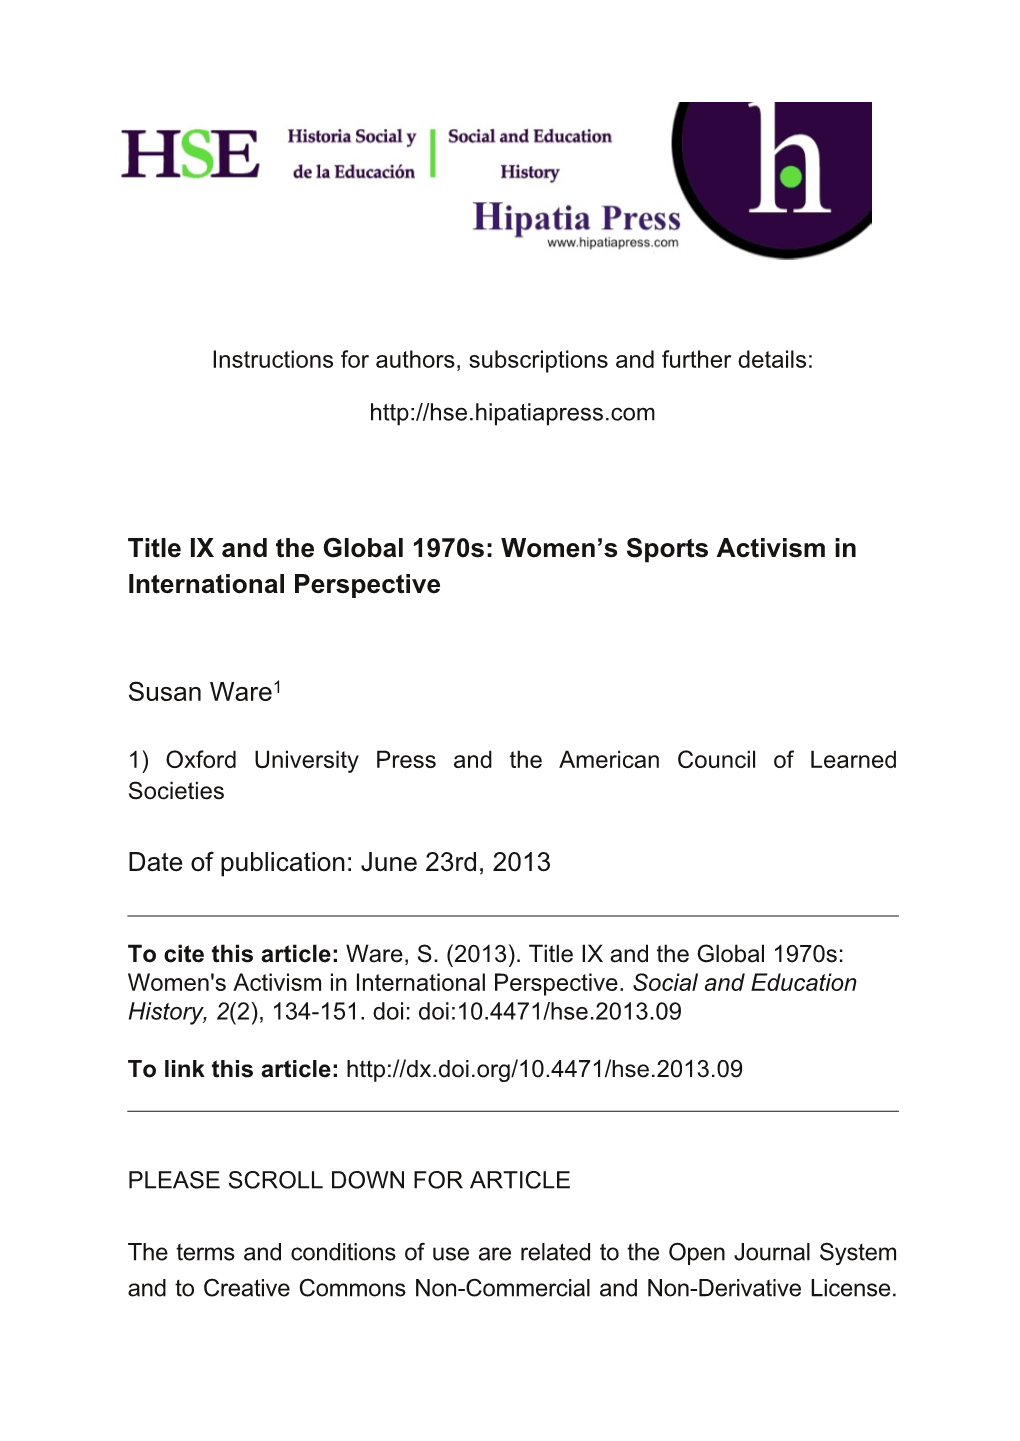 Title IX and the Global 1970S: Women's Sports Activism